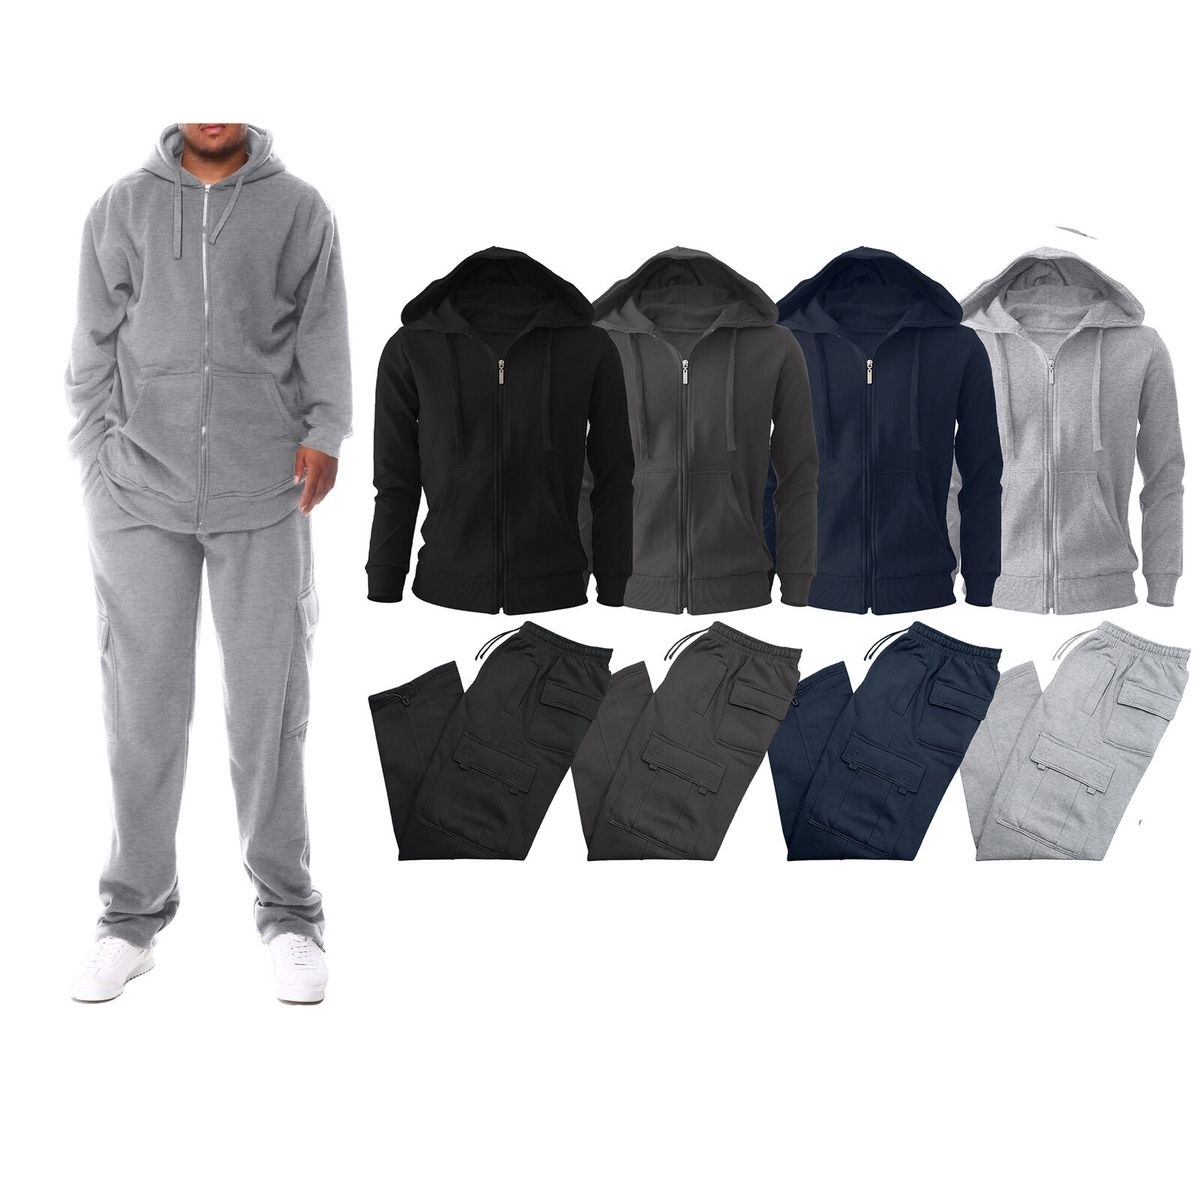 Multi-Pack: Men's Big & Tall Winter Warm Athletic Active Cozy Fleece Lined Multi-Pocket Full Zip Up Cargo Tracksuit - Grey, 1-pack, Large